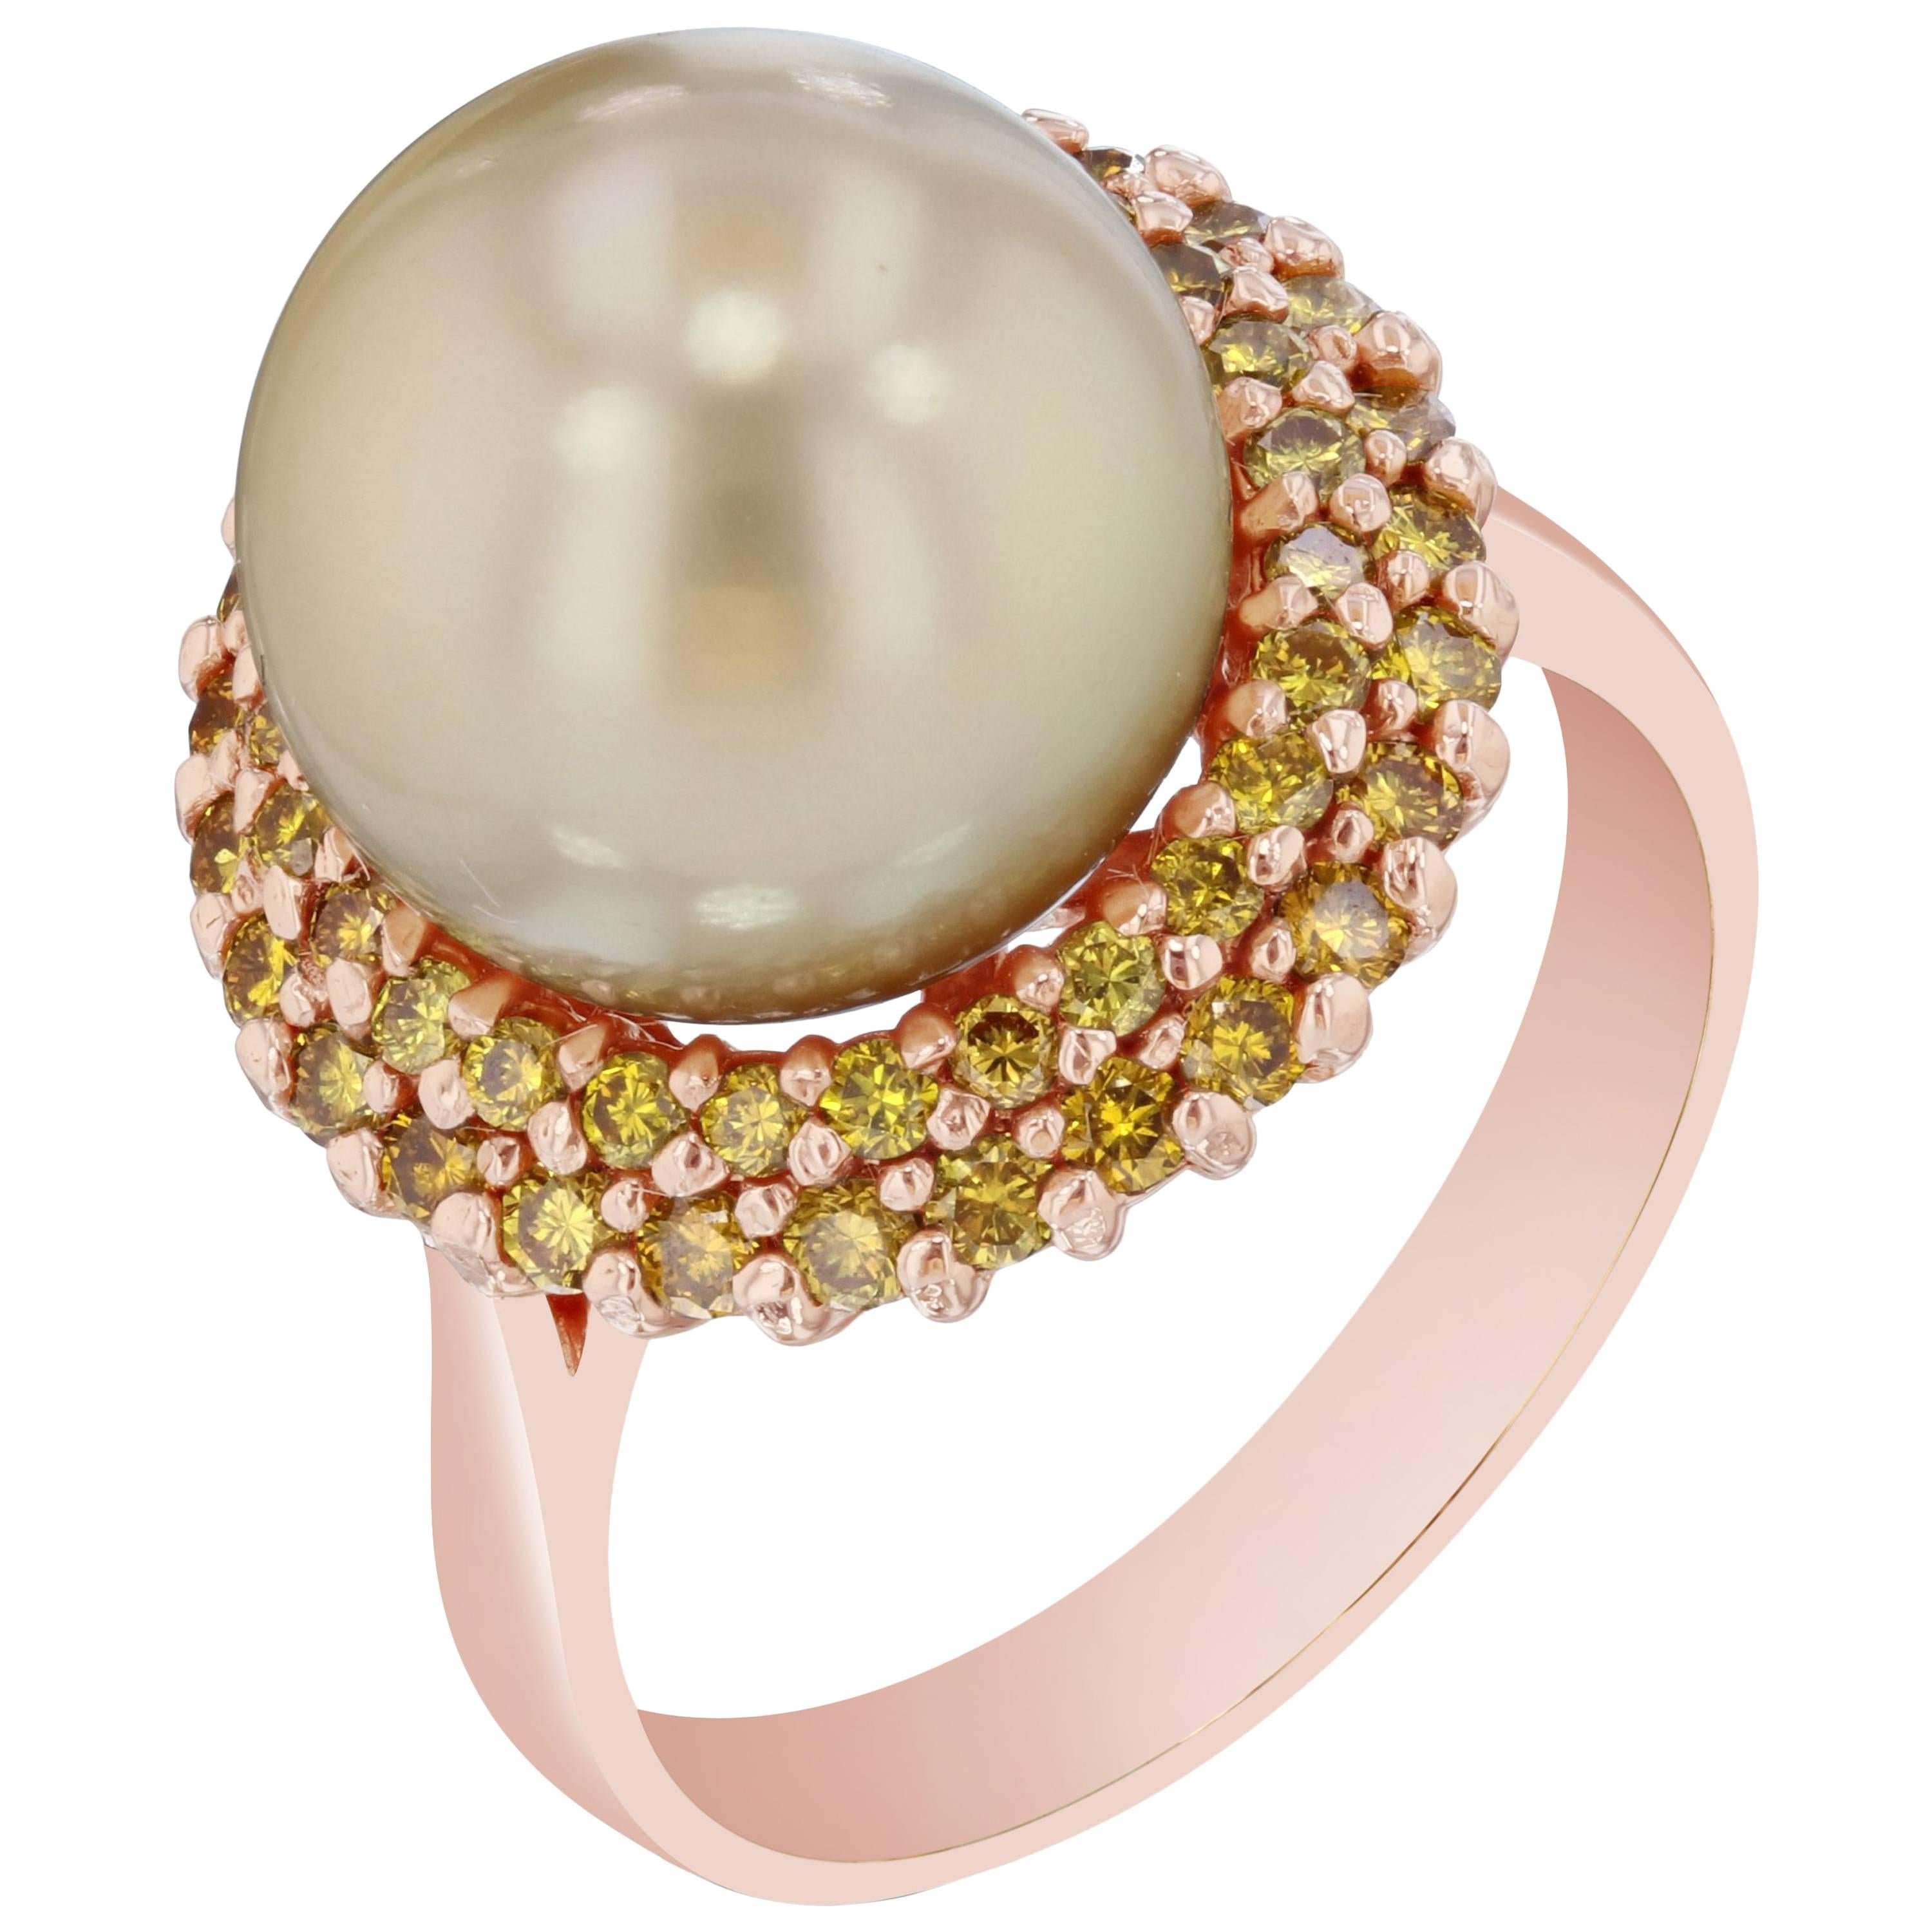 0.82 Carat Golden South Sea Pearl Yellow Diamond Cocktail Ring